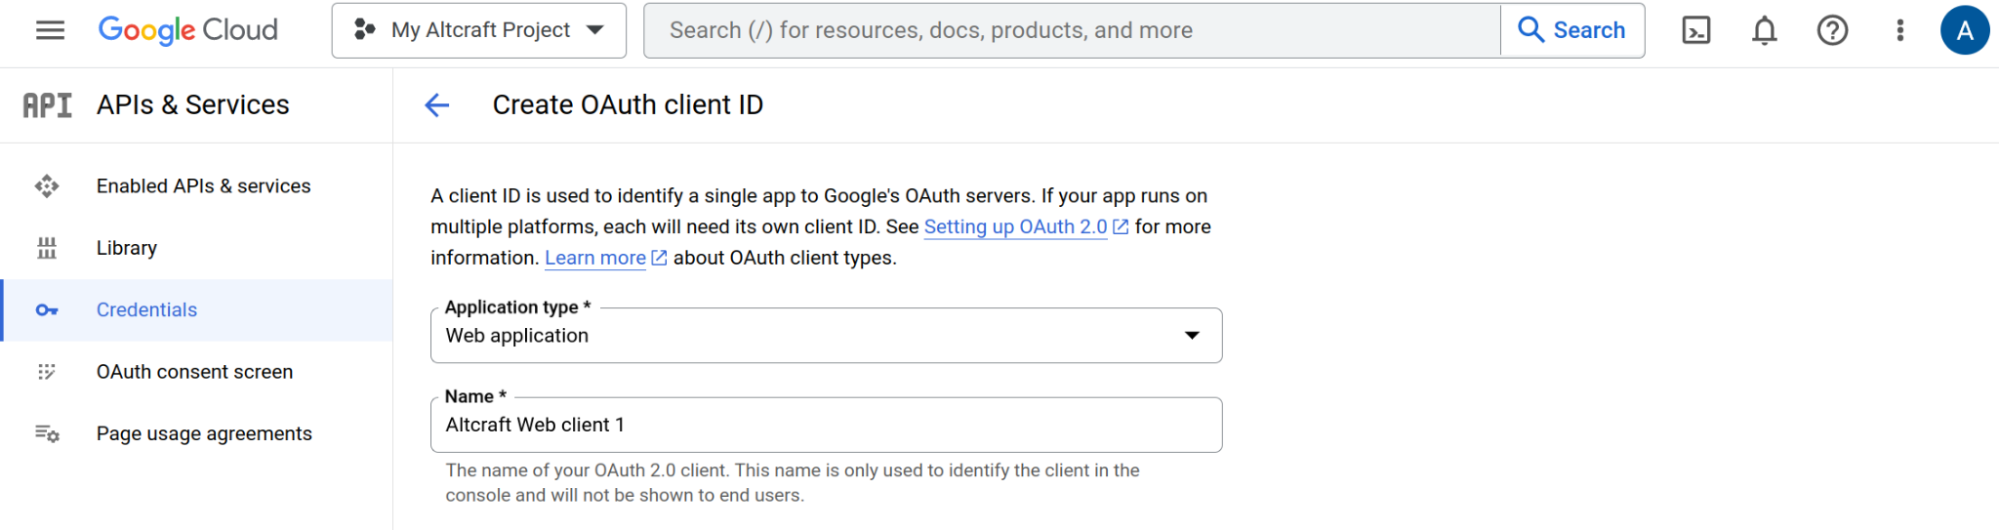 Creating OAuth client